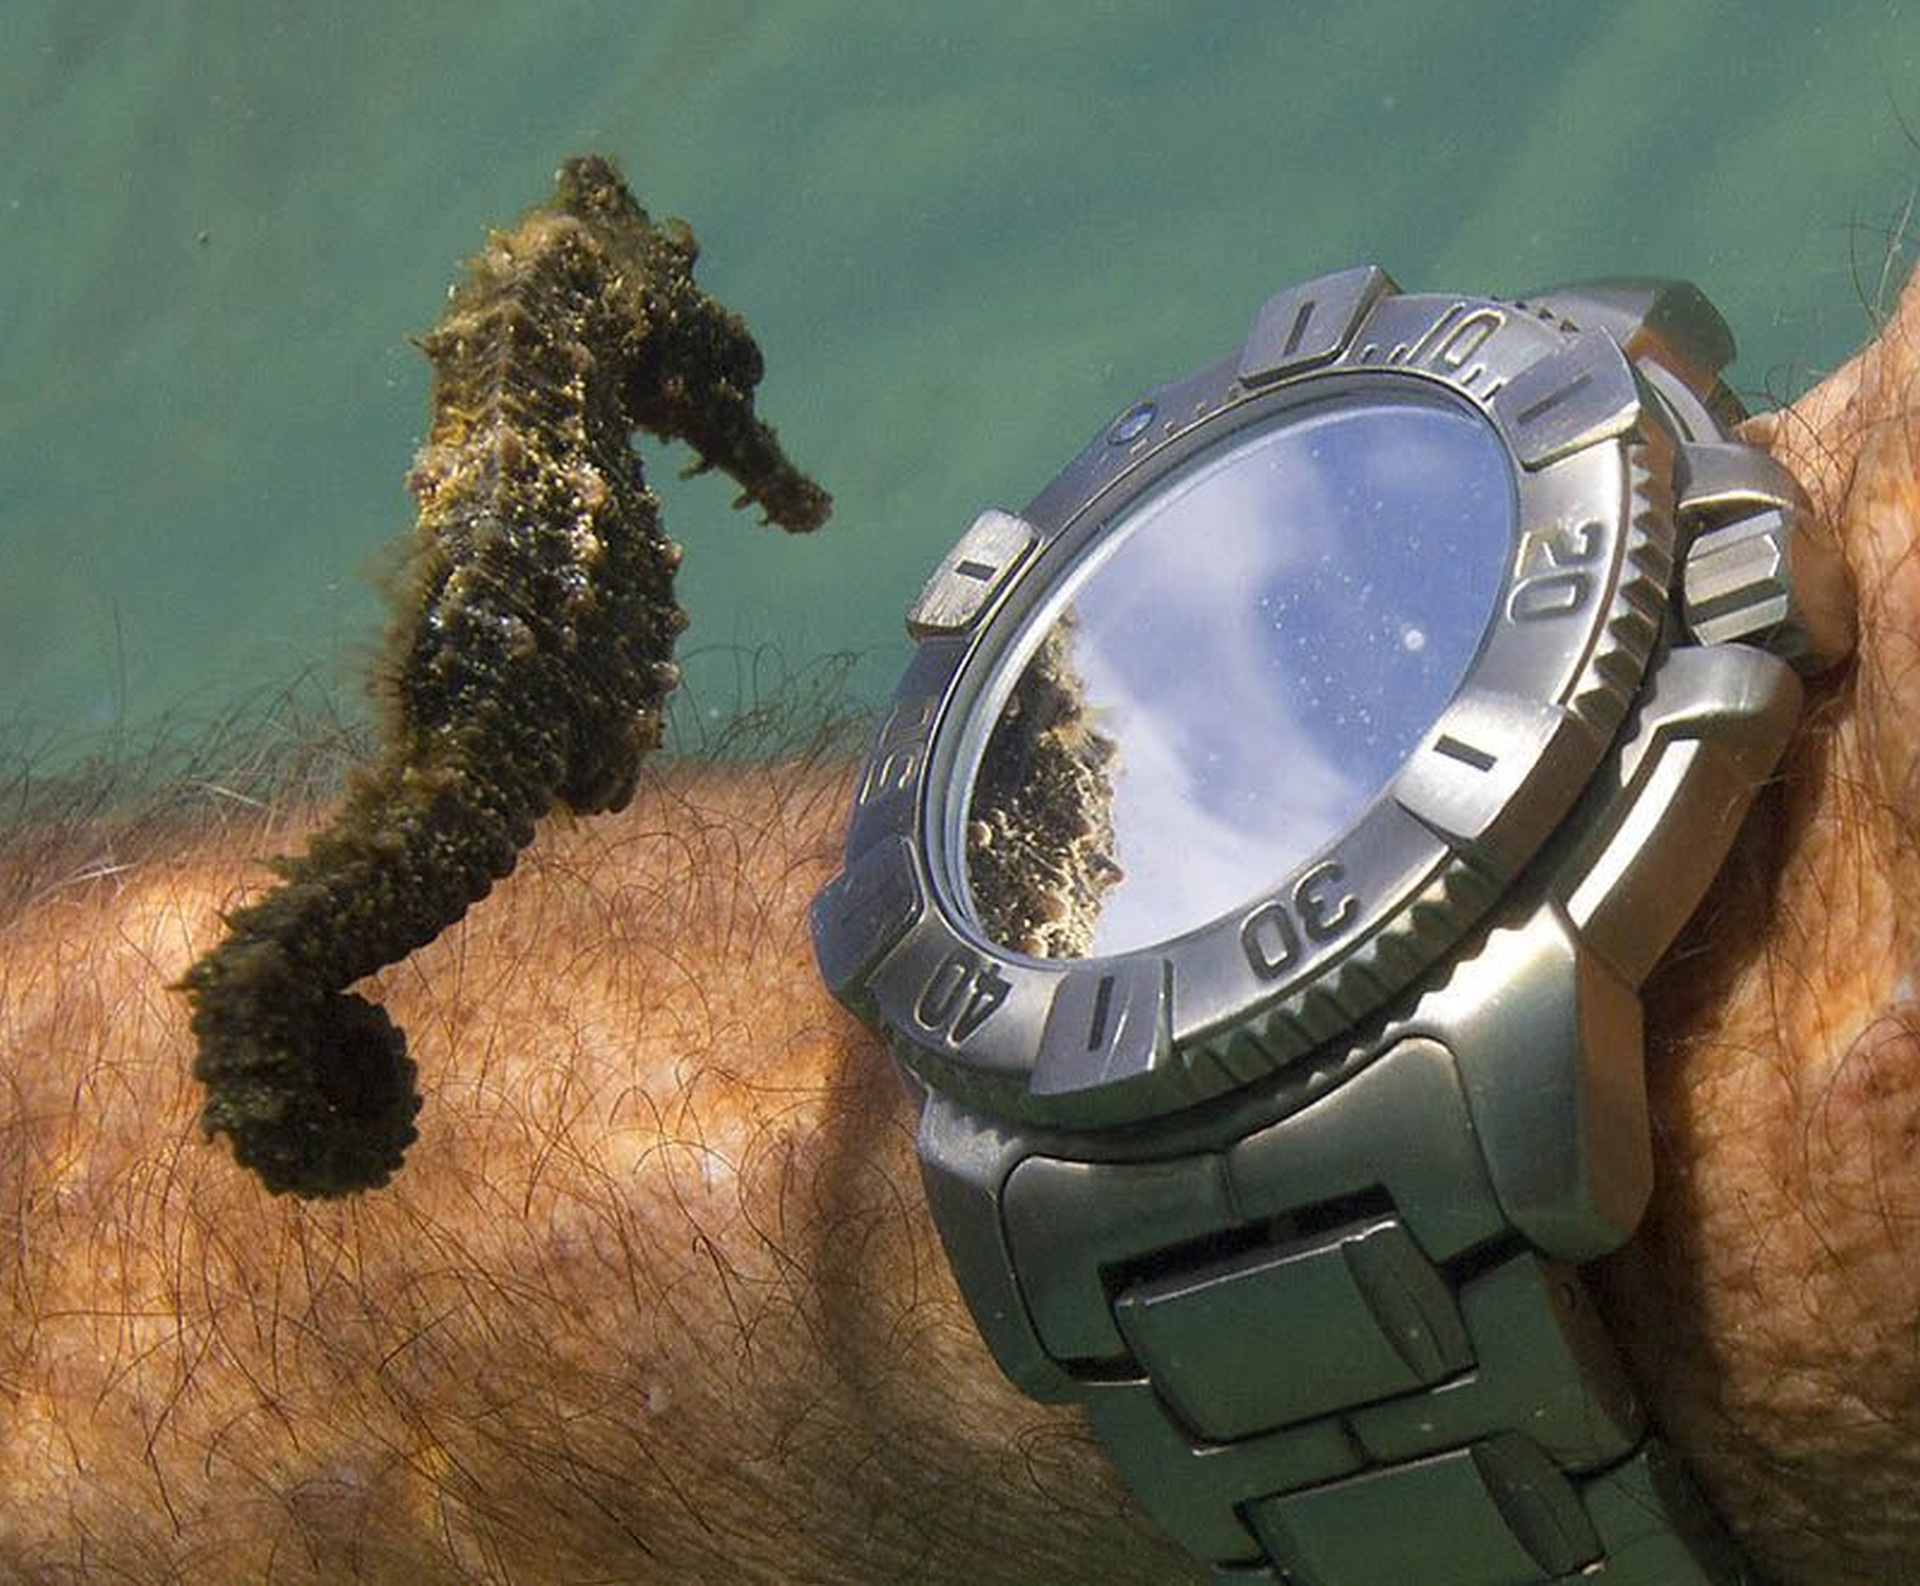 A still shot of a seahorse taking a moment to gaze at a diver's watch.